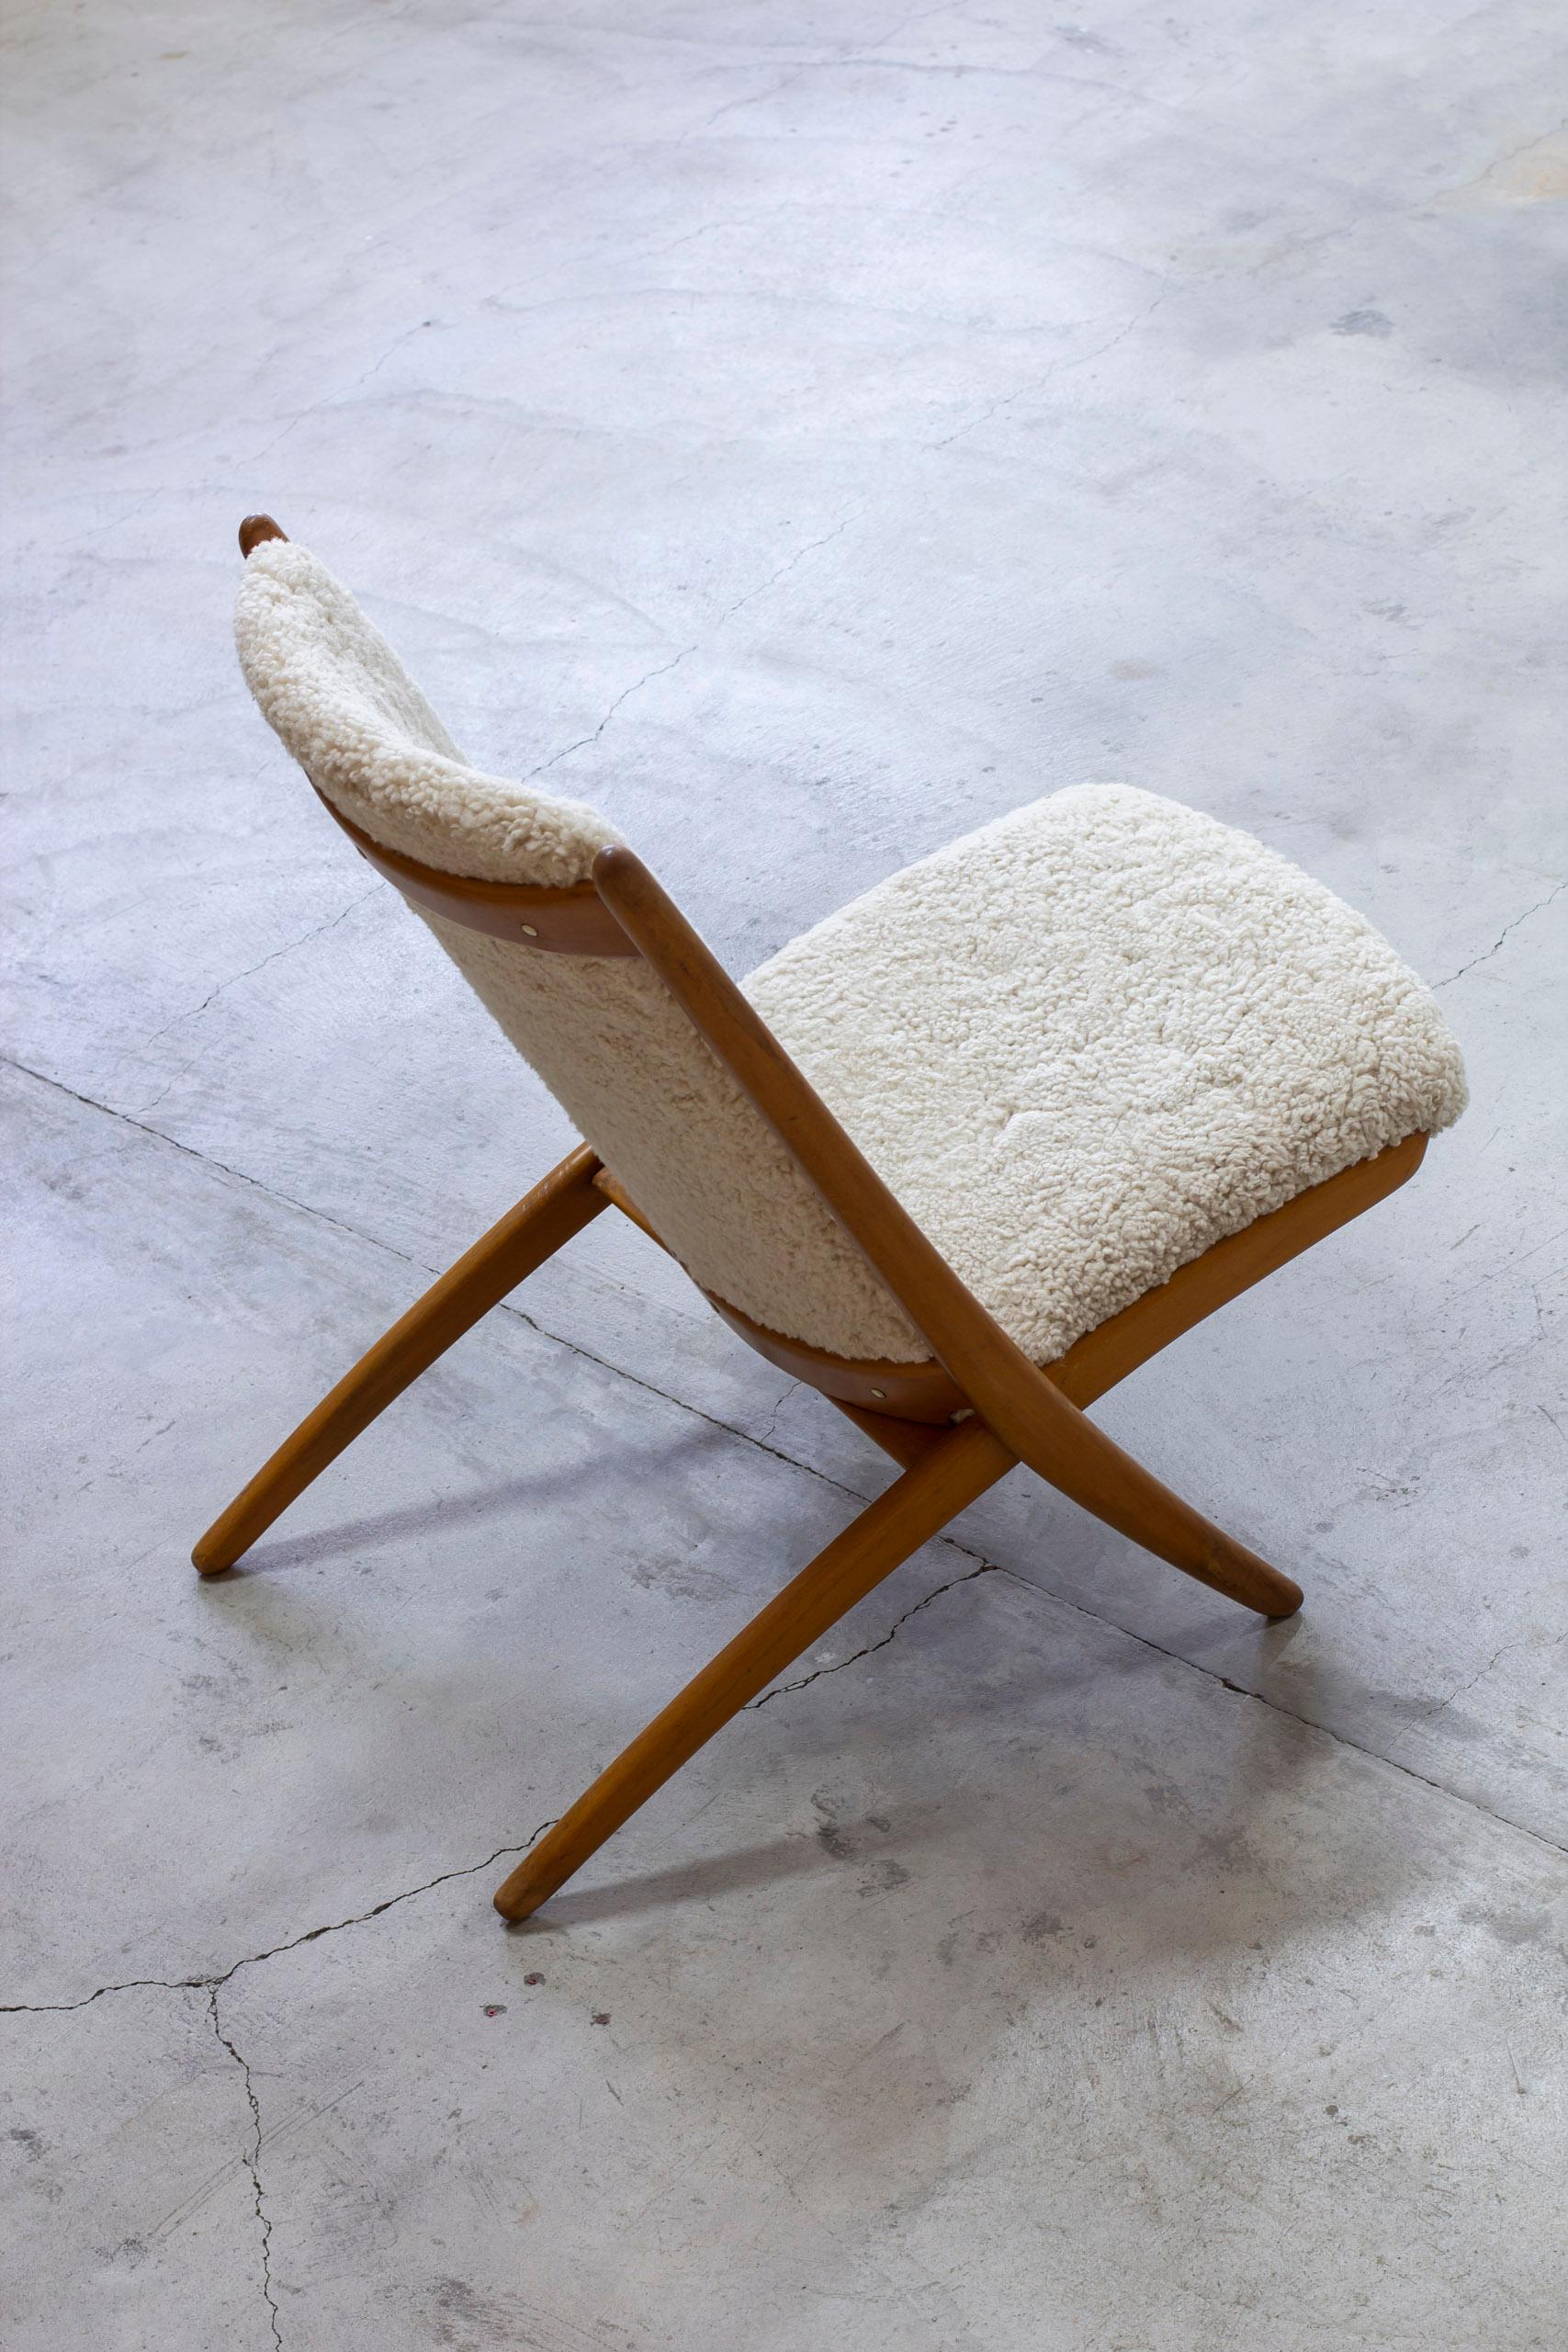 Demountable scissor style lounge chair, model Nordic. Designed by Ingmar Relling and produced in Norway during the 1950s by Vestlandske Stol og Møbelfabrikk. Frame made from stained lacquered beech with new sheep skin upholstery in cream color. Good